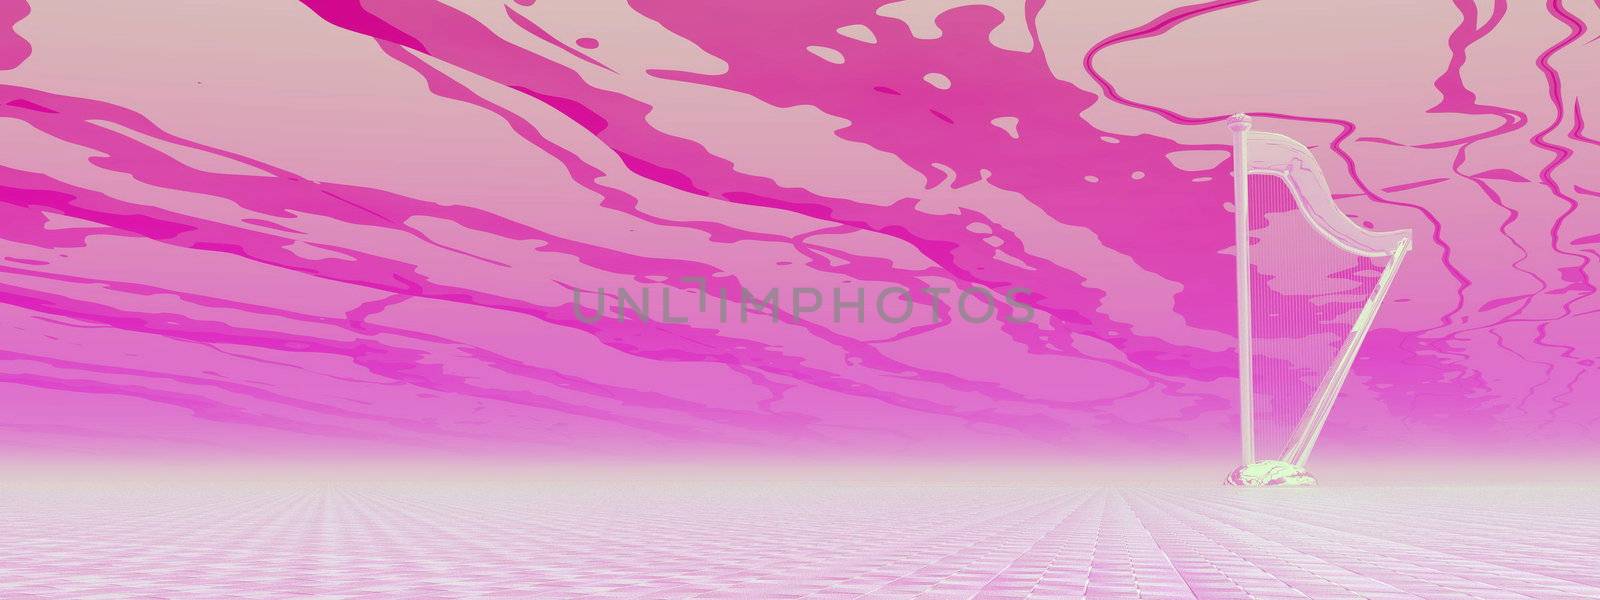 White harp standing alone in pink surrealistic background